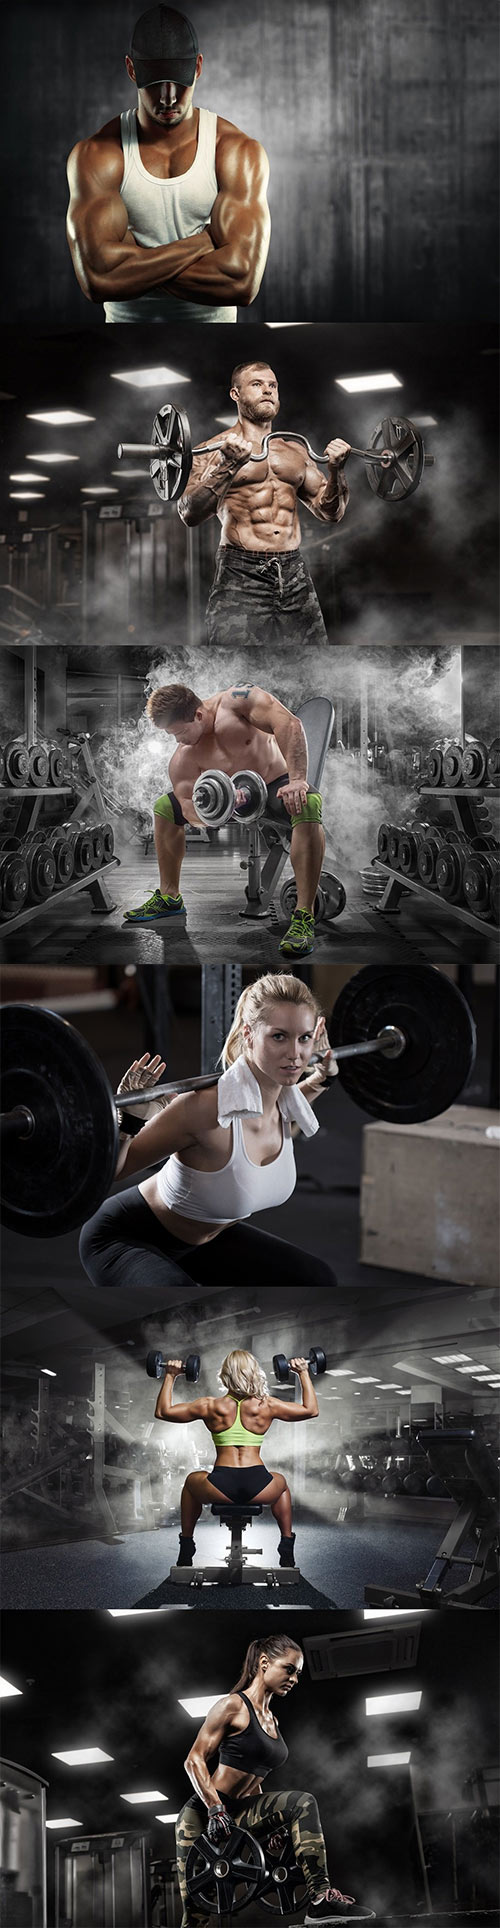 Photos - Collection of weightlifting bodybuilding gym dumbbell bar exercise machine